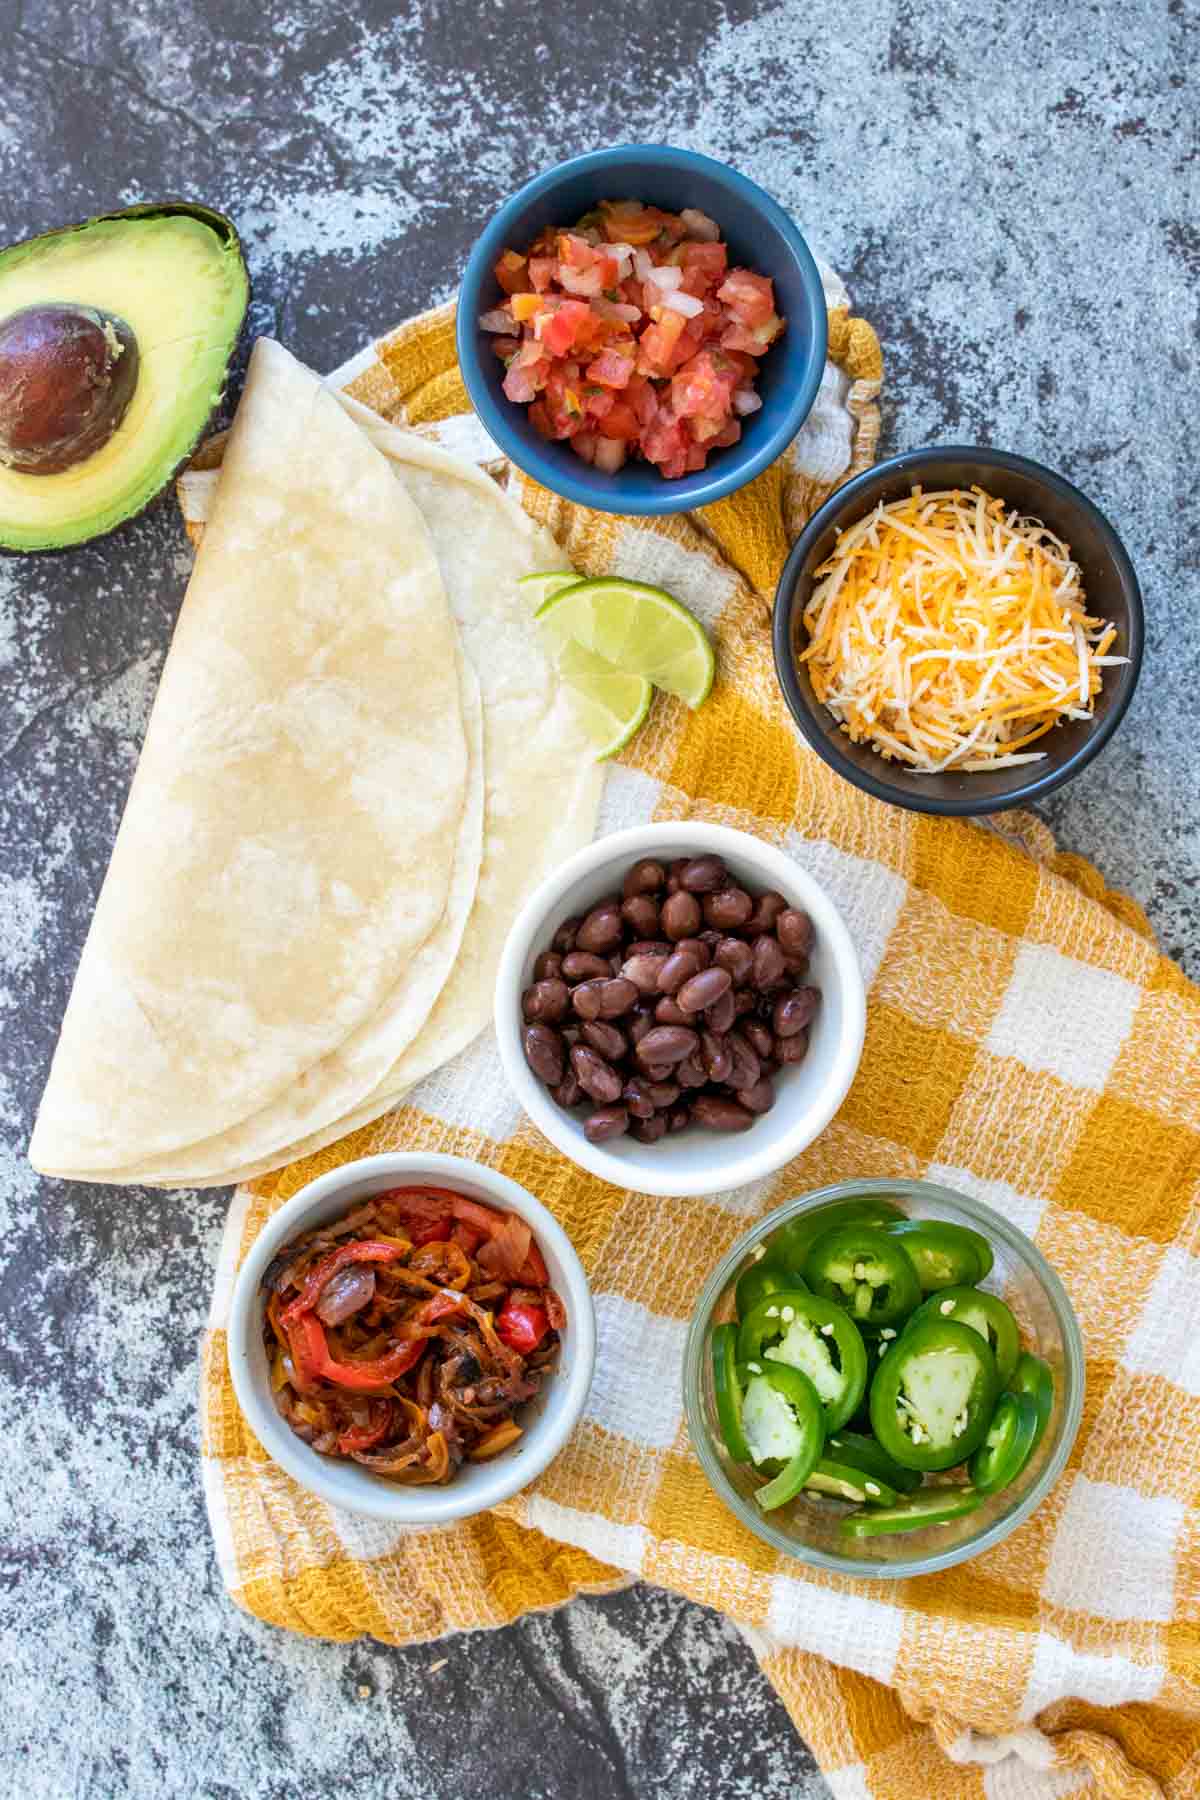 Ingredients needed to make a bean, sauteed pepper and cheese quesadilla and toppings for it sitting on a grey rock surface